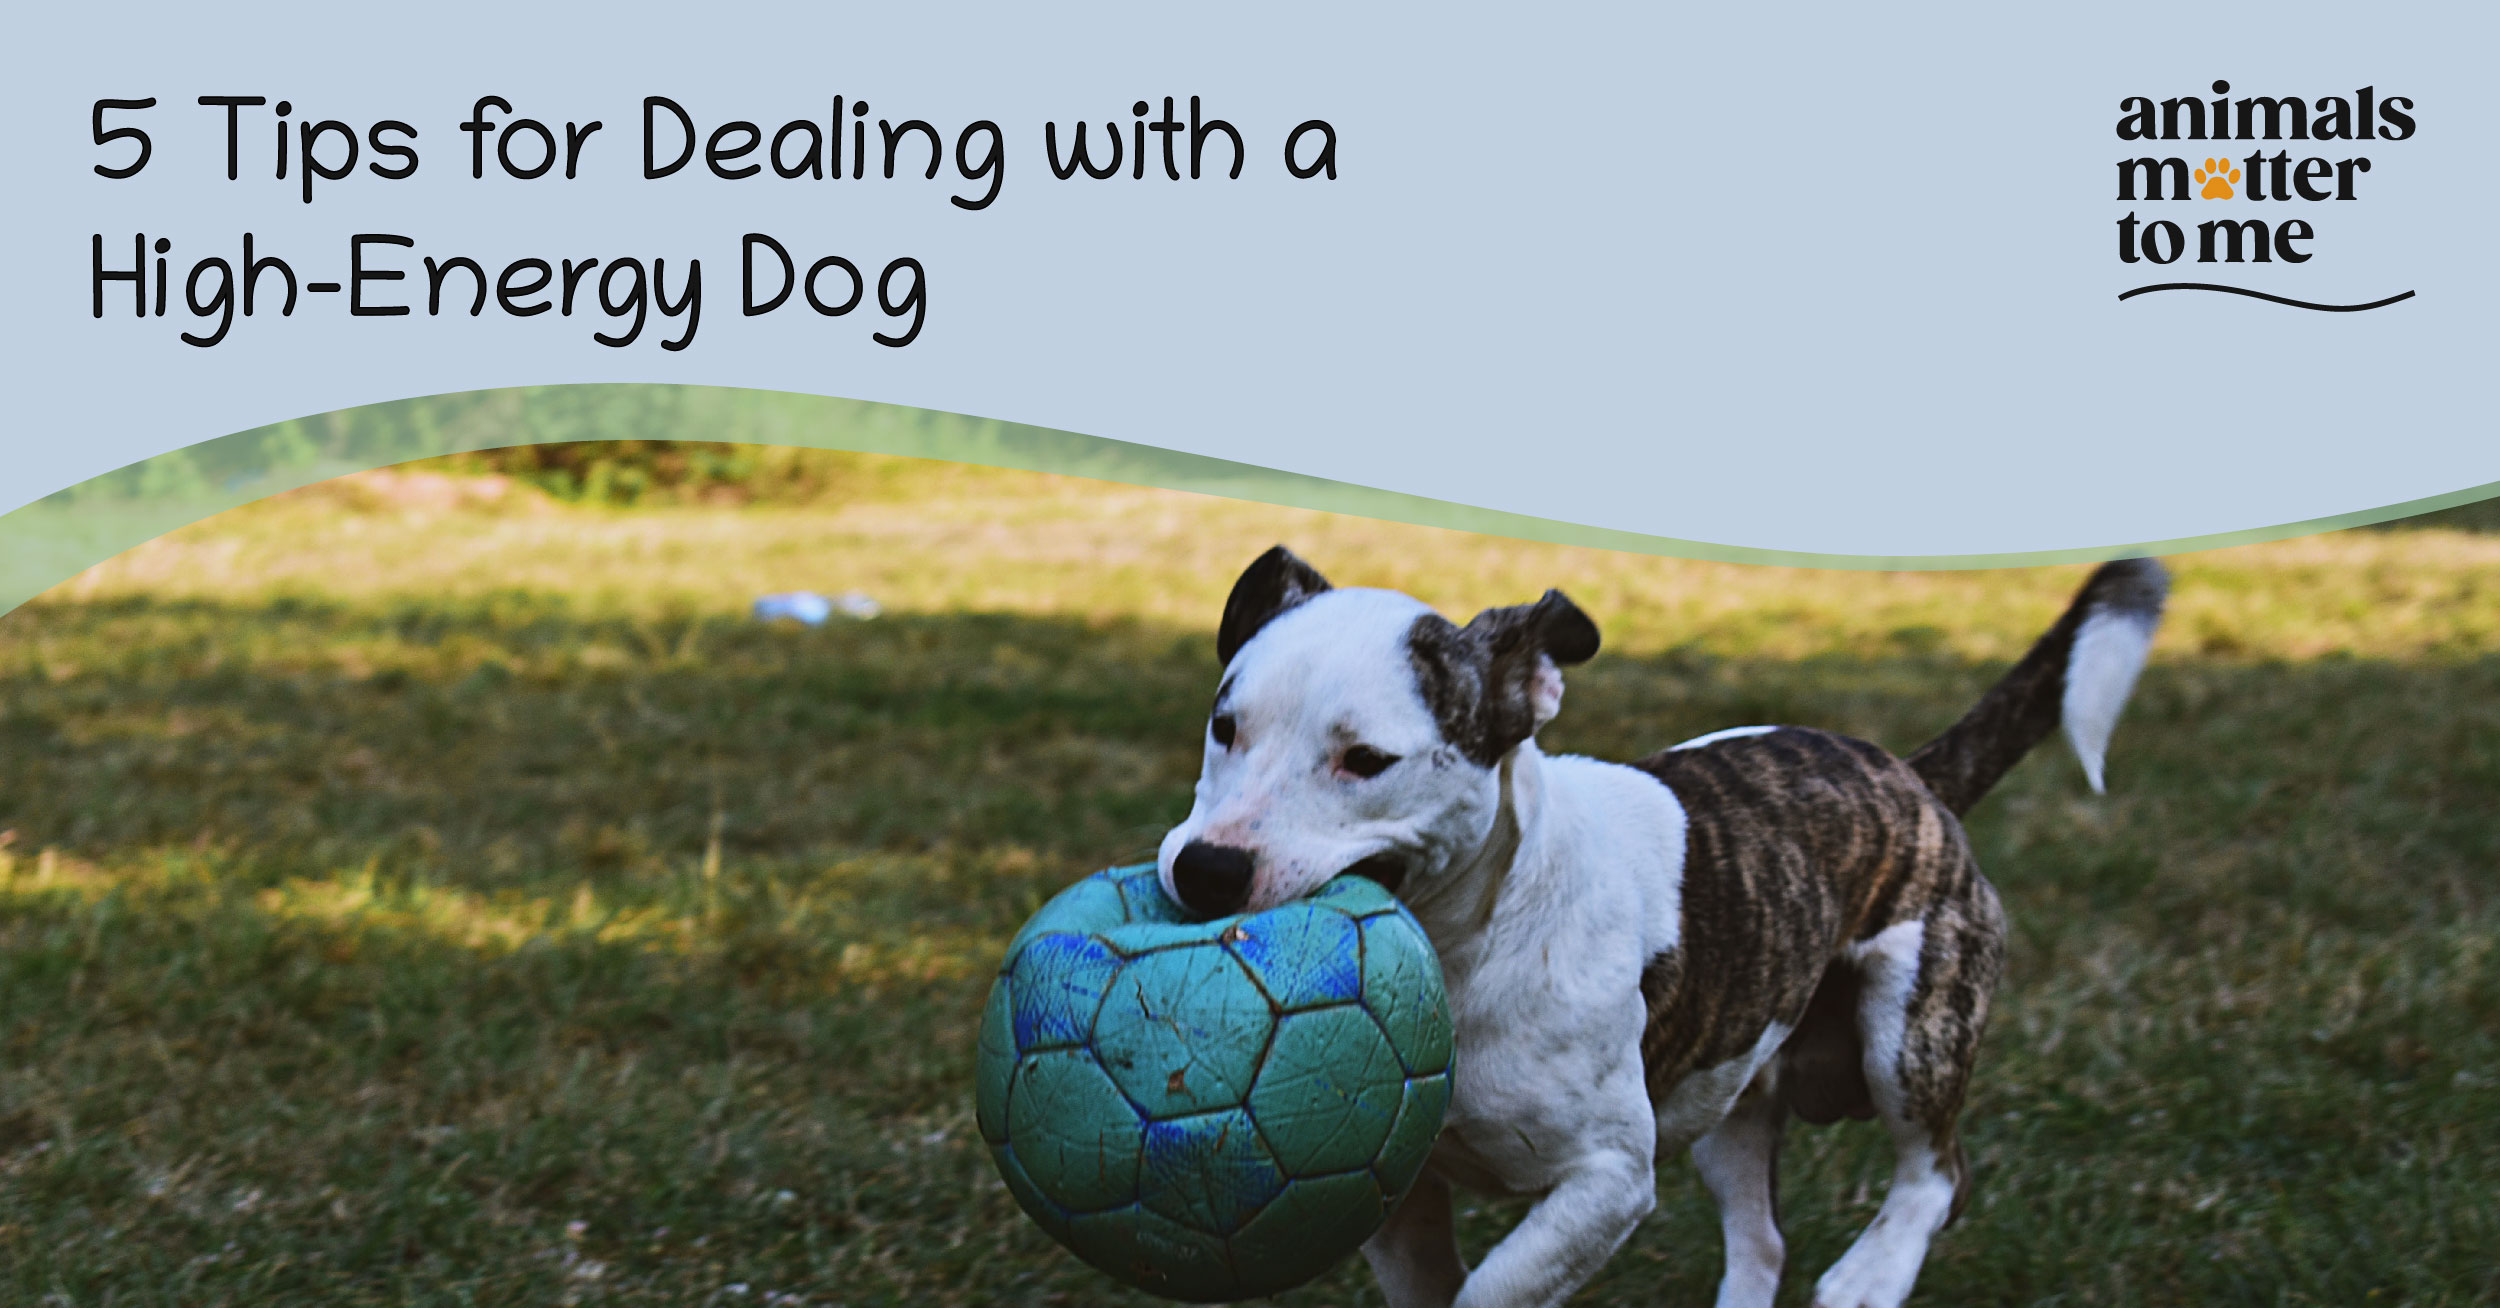 5 tips for dealing with a high-energy dog - Blog Cover